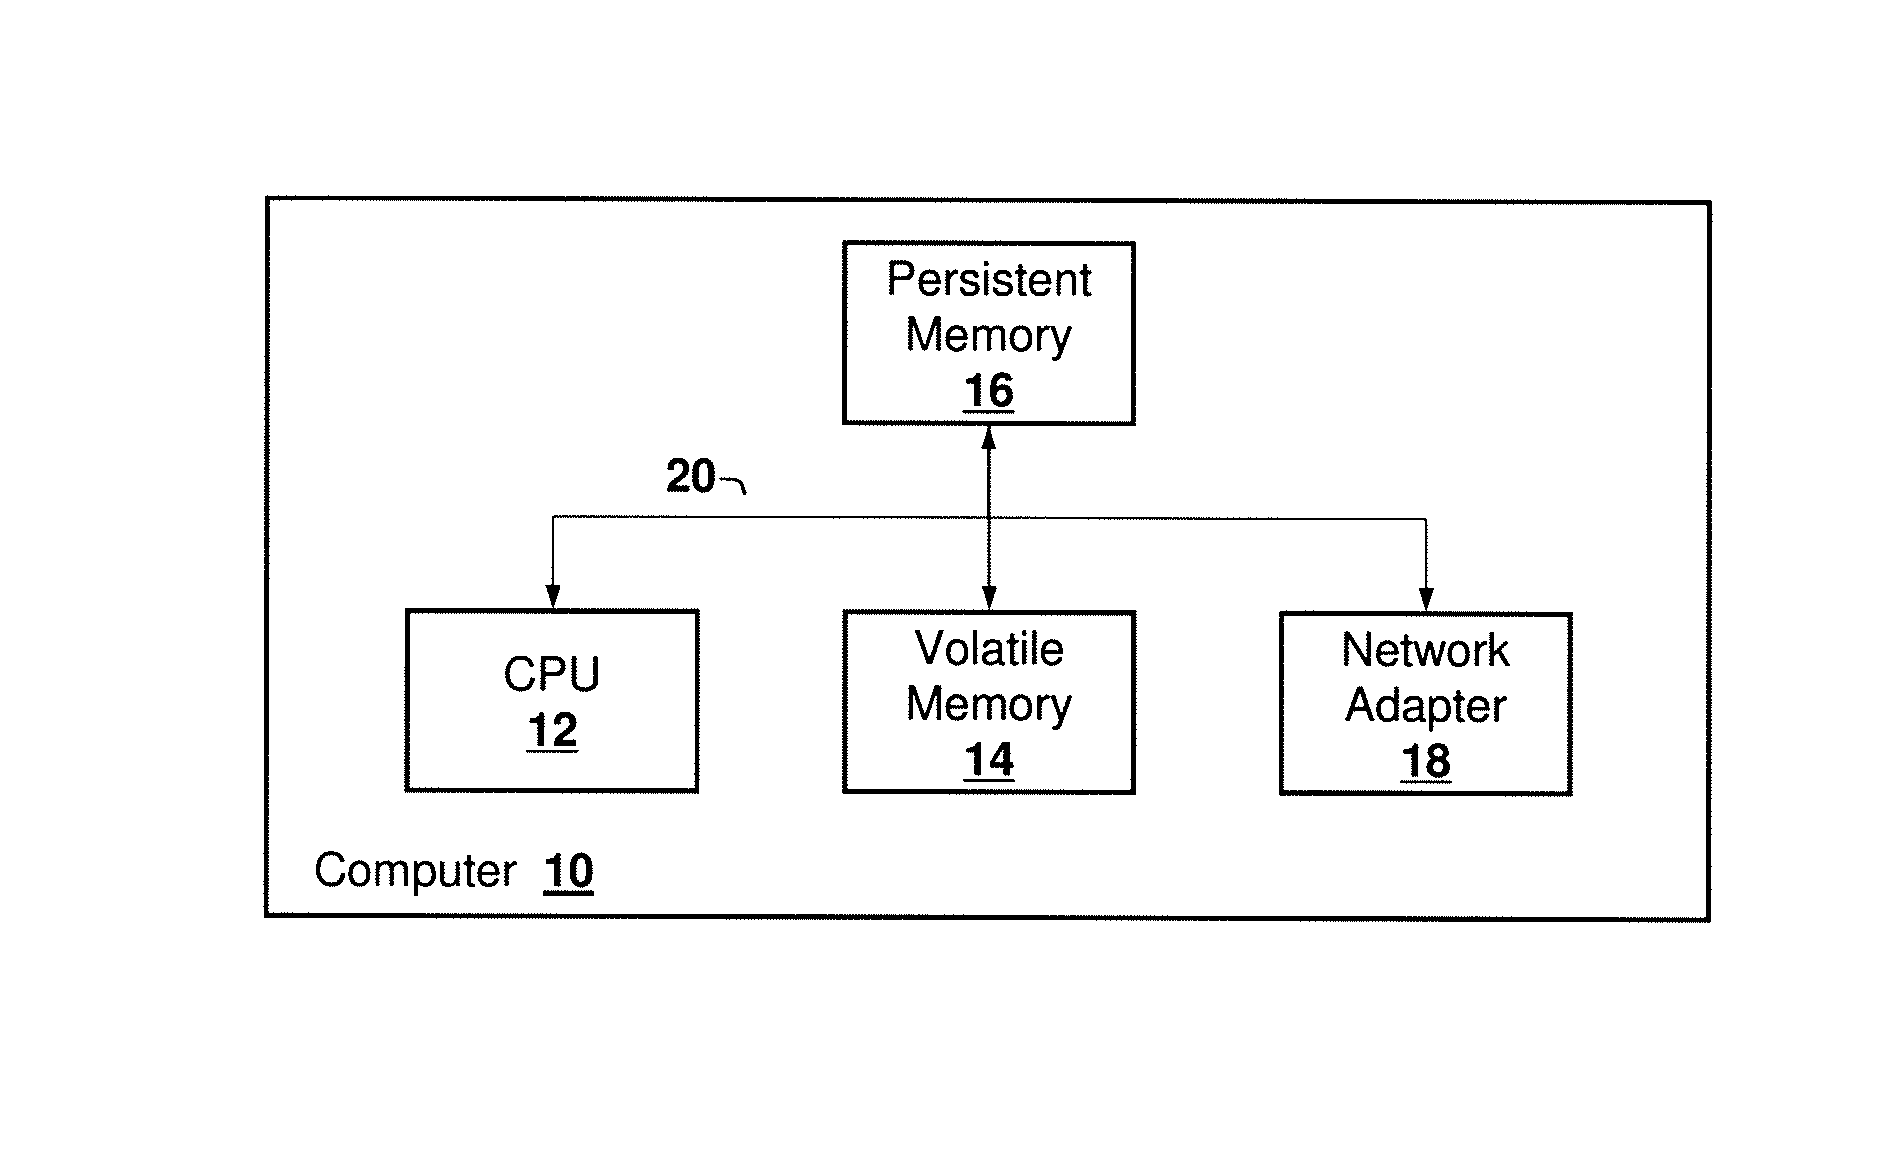 Failure detection and fencing in a computing system